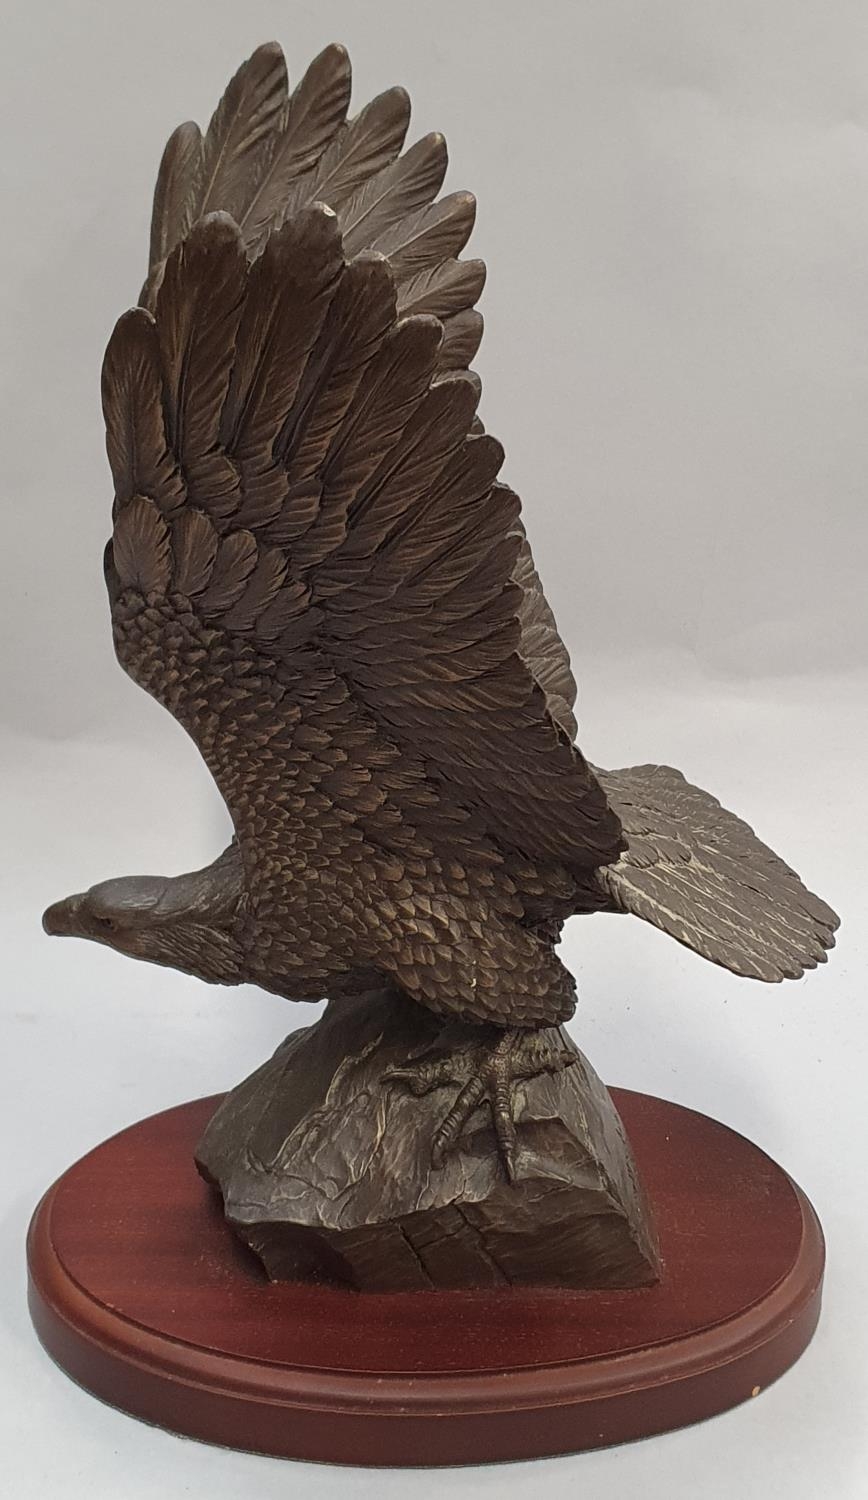 Heredites limited edition eagle by Tom Mackie 406/500 with certificate 32x15.5x21cm. - Image 6 of 8